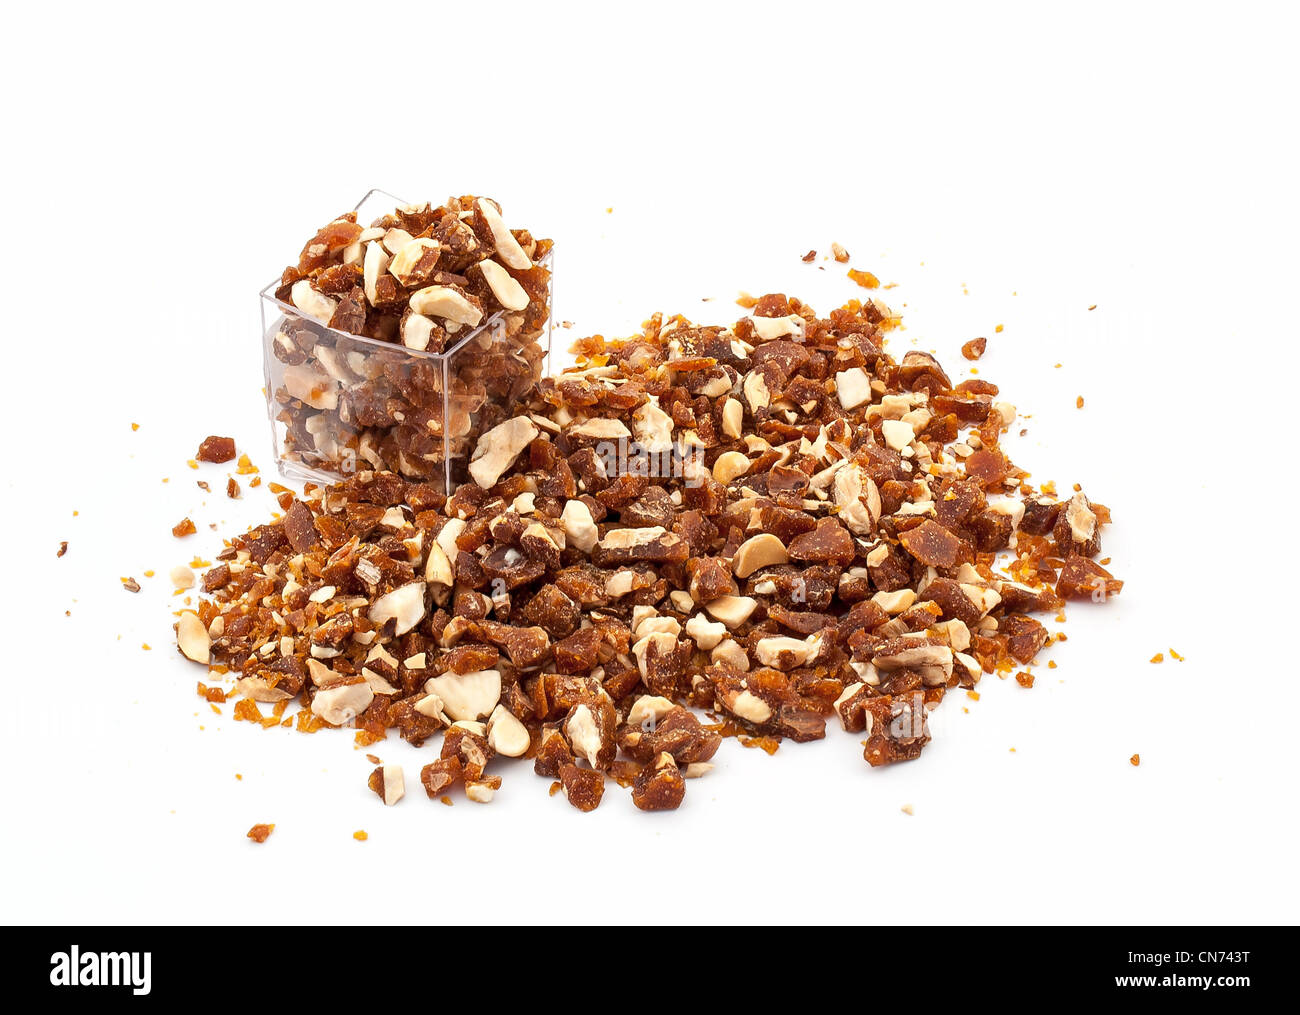 Caramelized crumbled Almonds for topping on white background Stock Photo